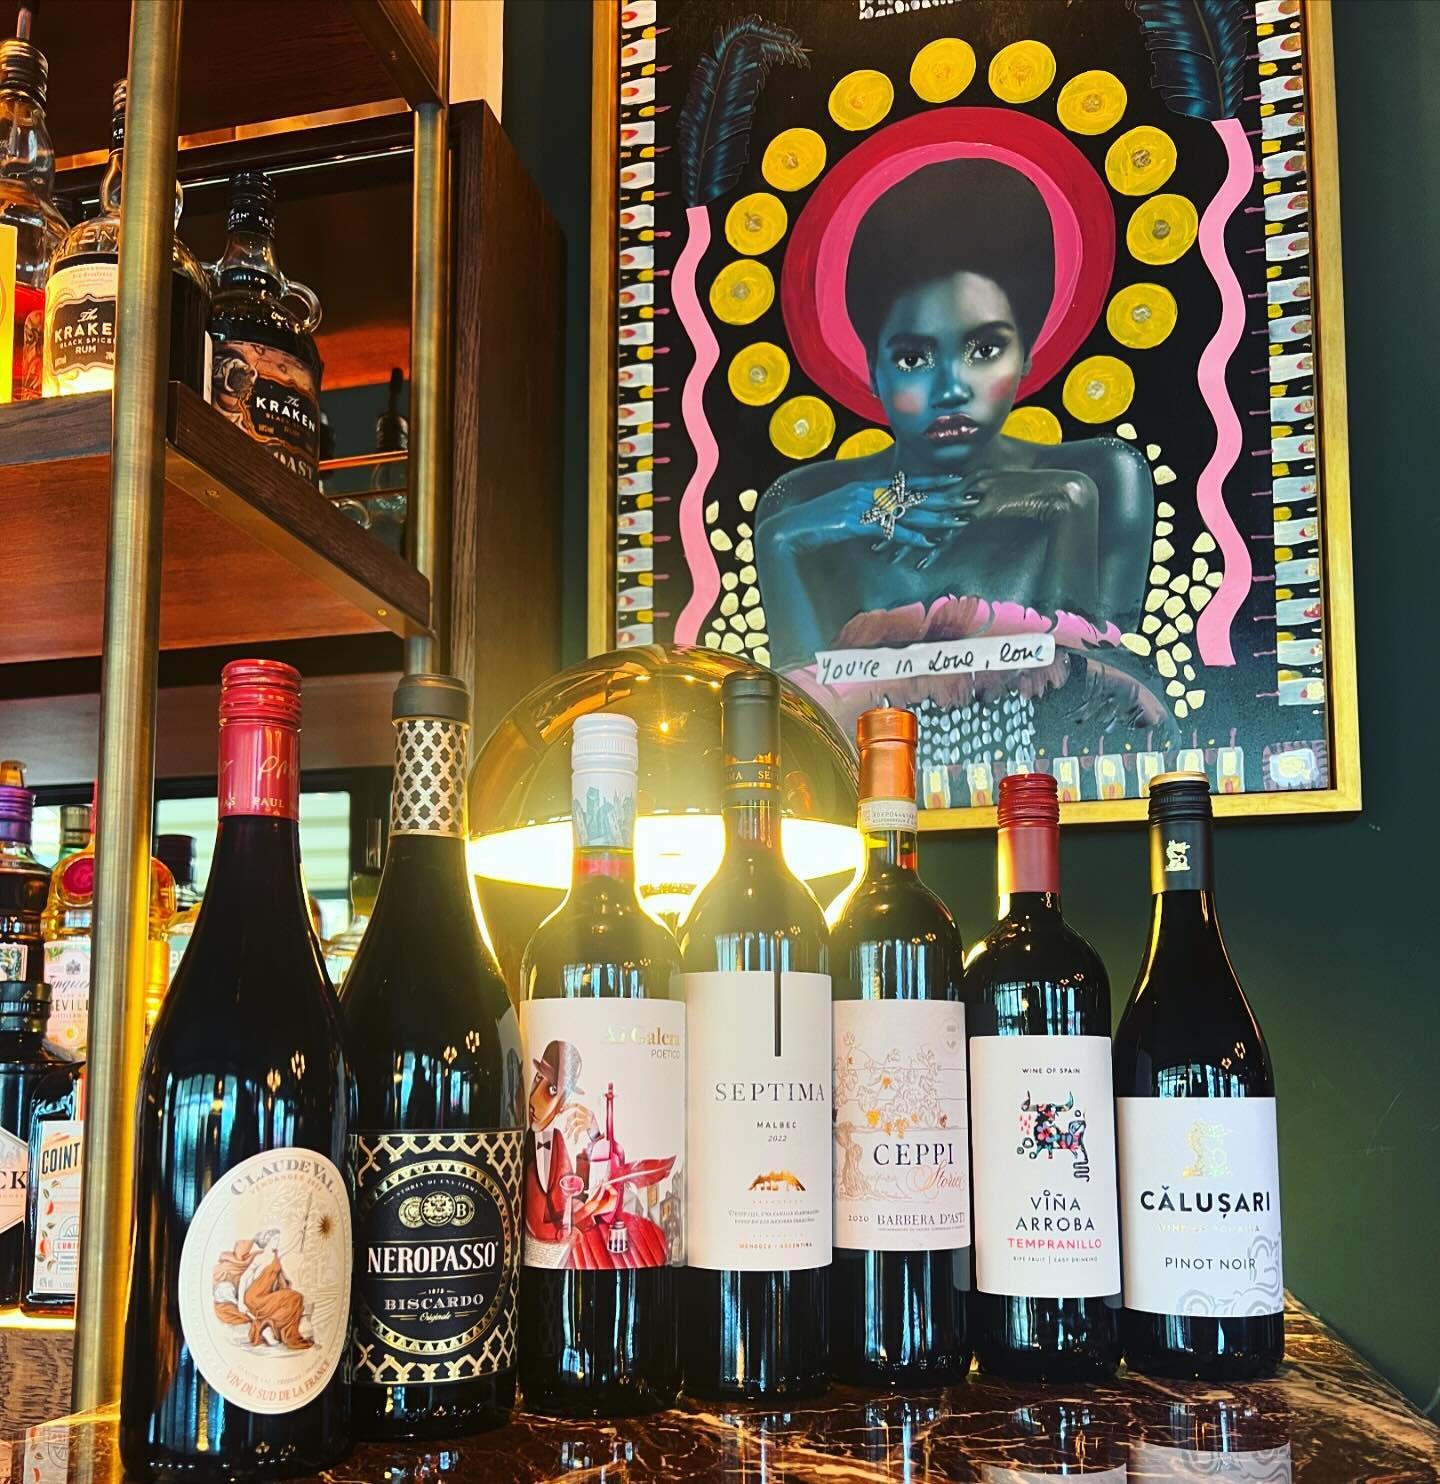 Here at Tapestry we are not all about the Cocktails 🍸 

Pop in and check out our eclectic wine list designed by the amazing guys at @drinkwarehouseuk 

All our still wines are served by the glass, carafe and bottle! 🍷

If bubbles are your thing the